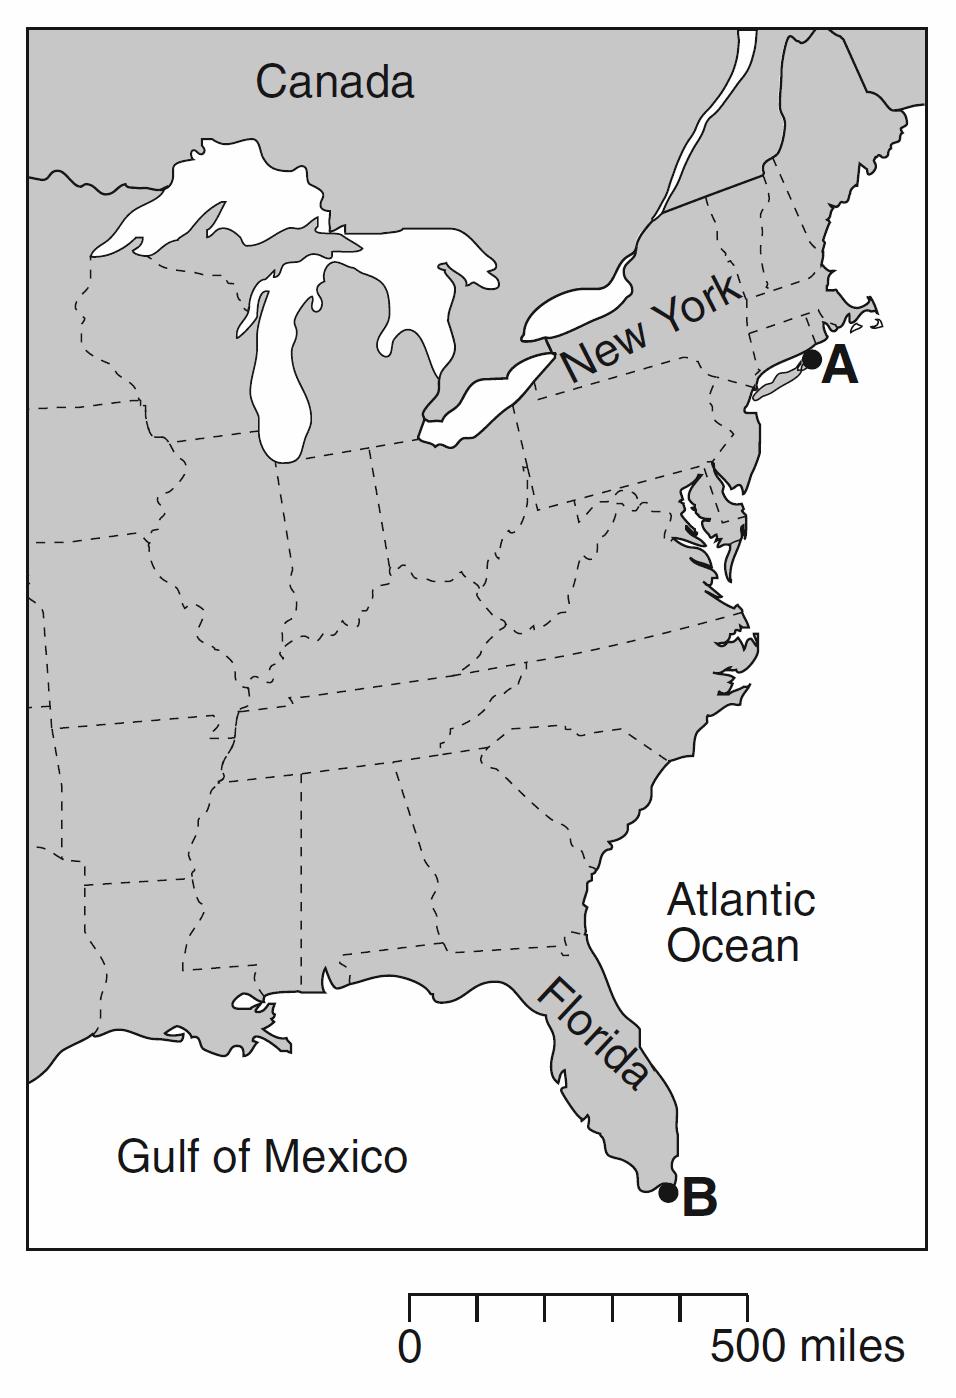 13.The map below shows an eastern portion of North America. Points A and B represent locations on the eastern shoreline.